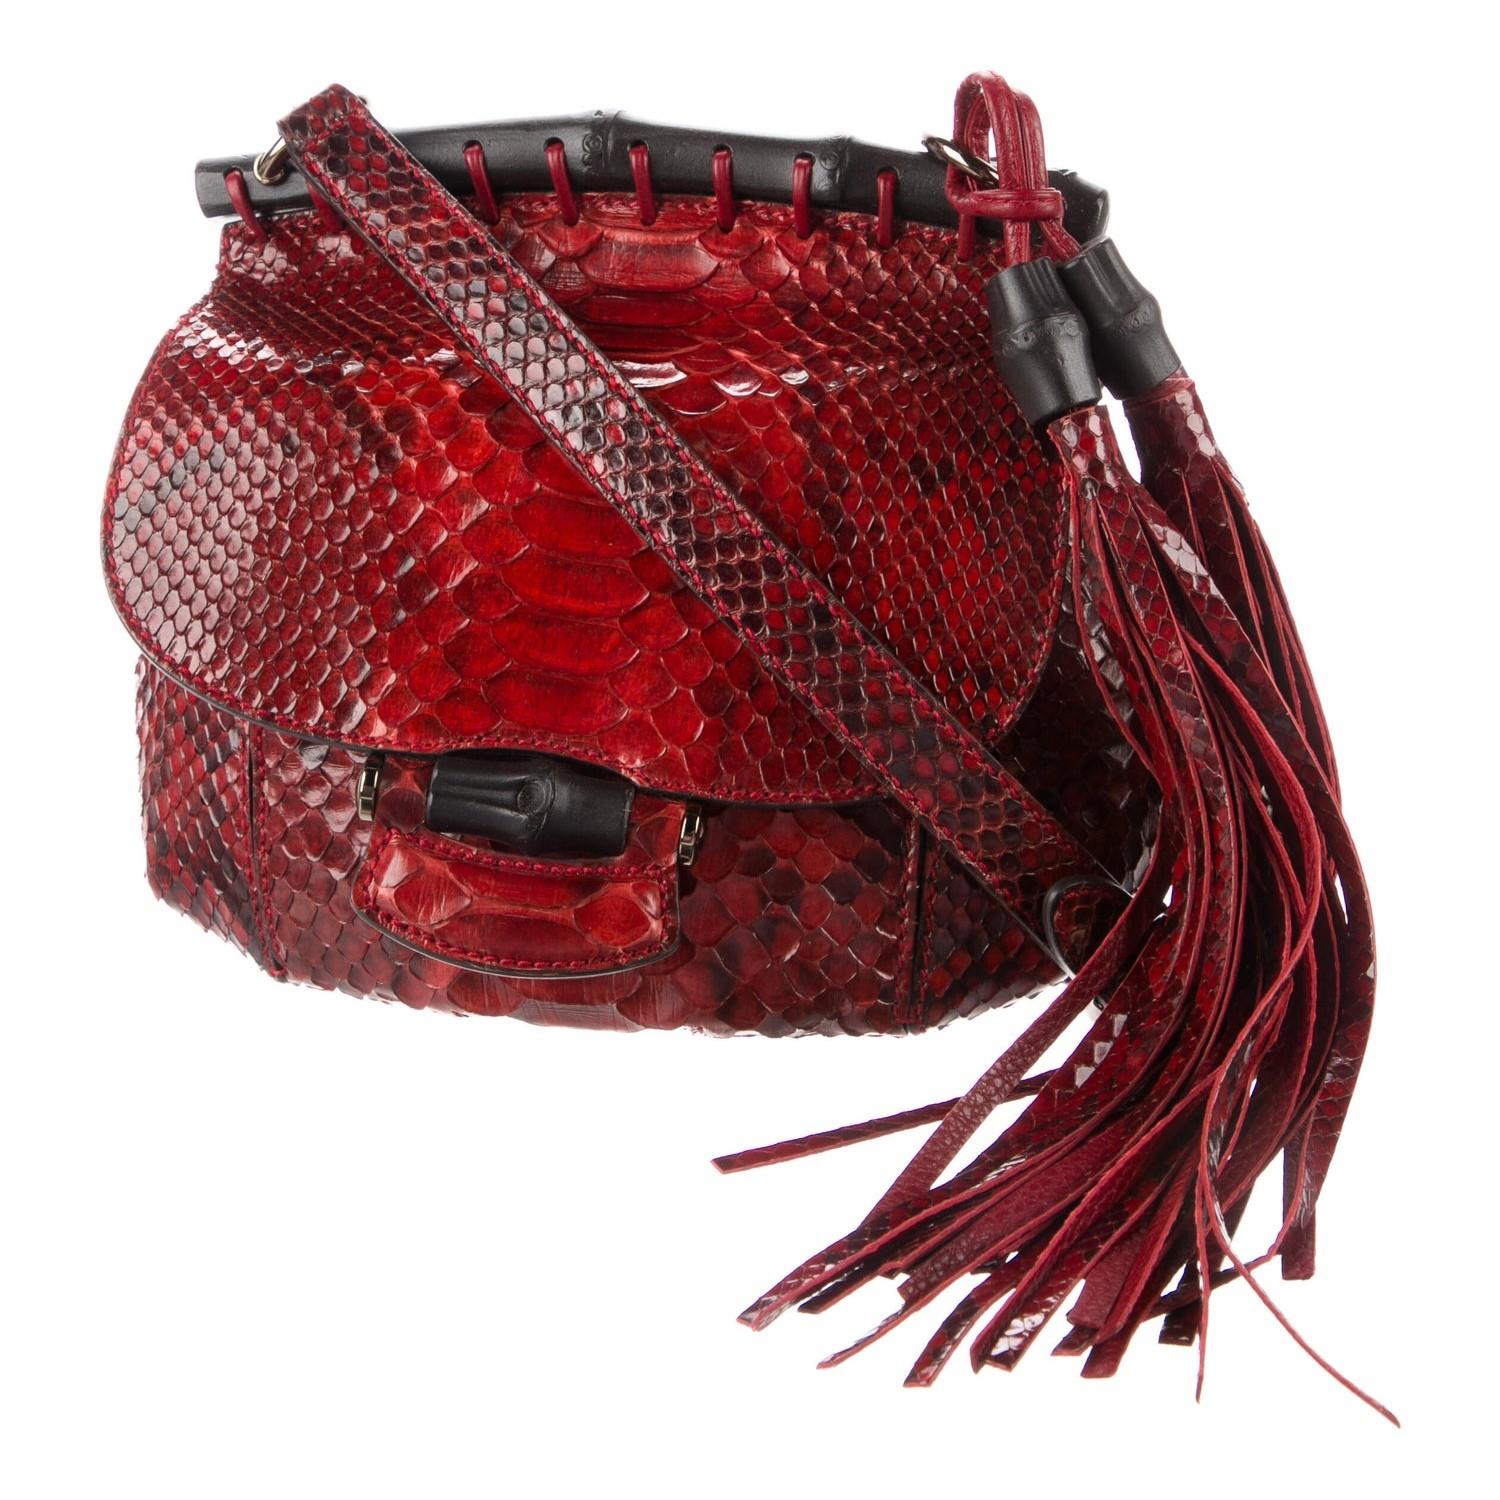 New Gucci Nouveau Python Fringe Bamboo Runway Bag in Red $3100 For Sale 14